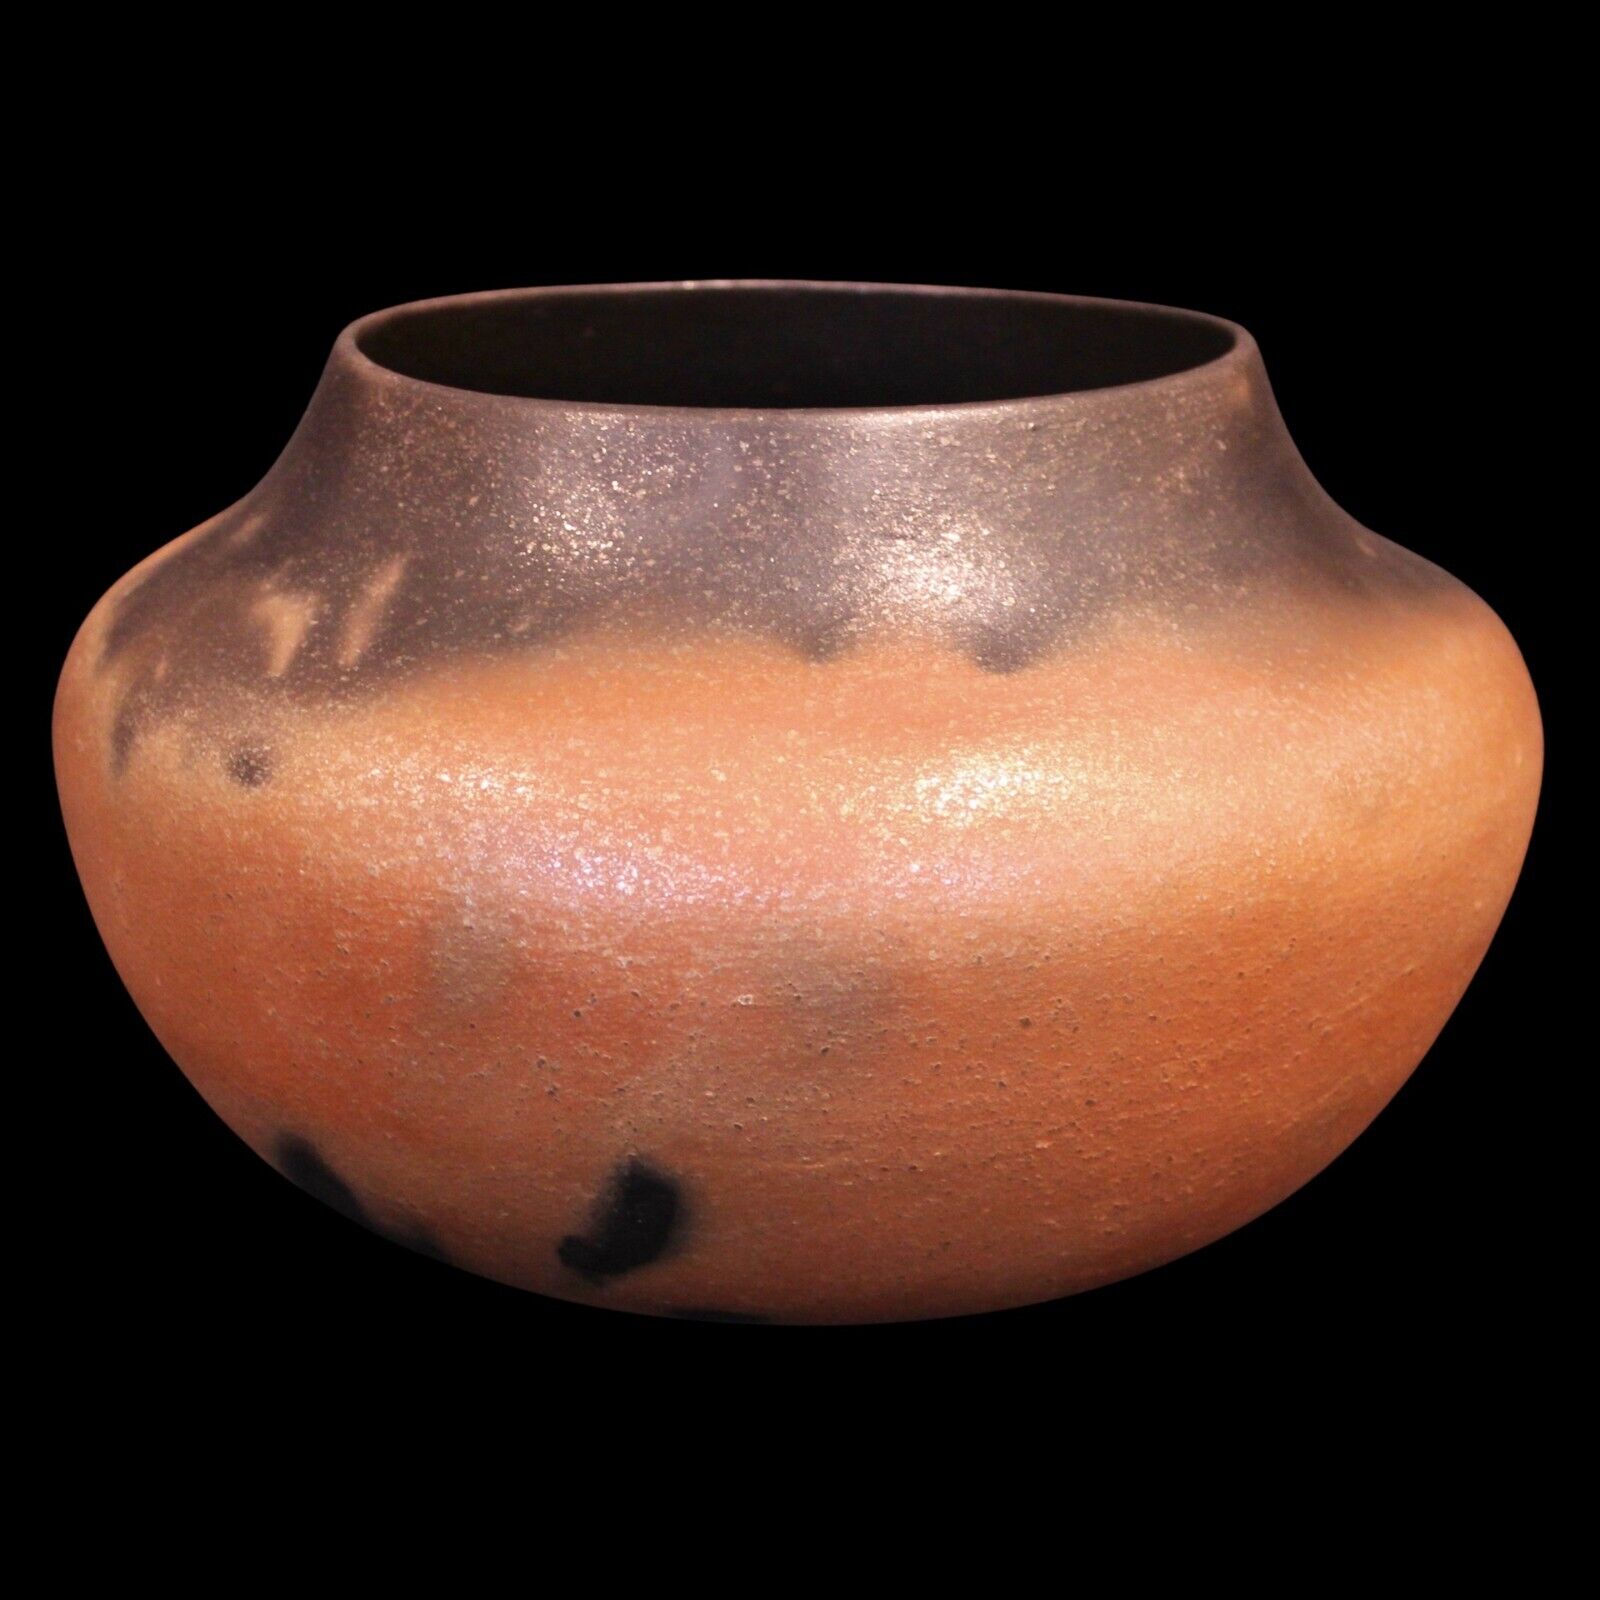 Taos Pueblo Micaceous Clay Pot with Fire Clouds by Angie Yazzie, 5\